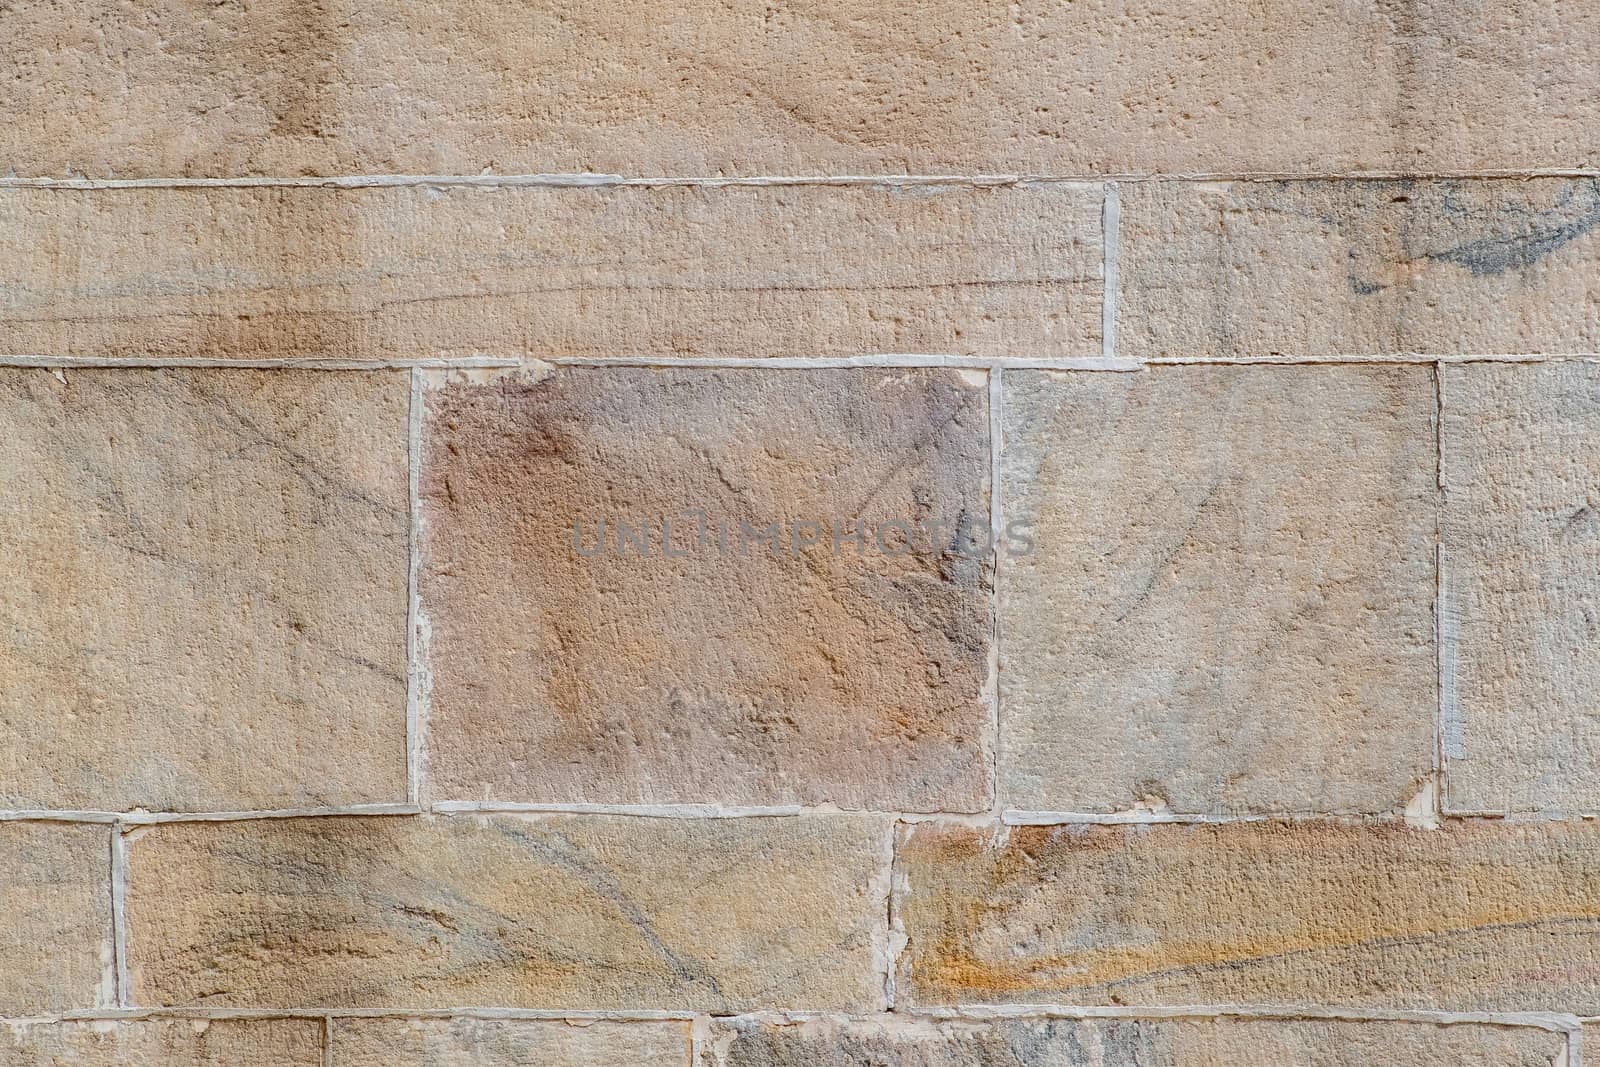 Stone wall texture background. Material construction and architectural detail.